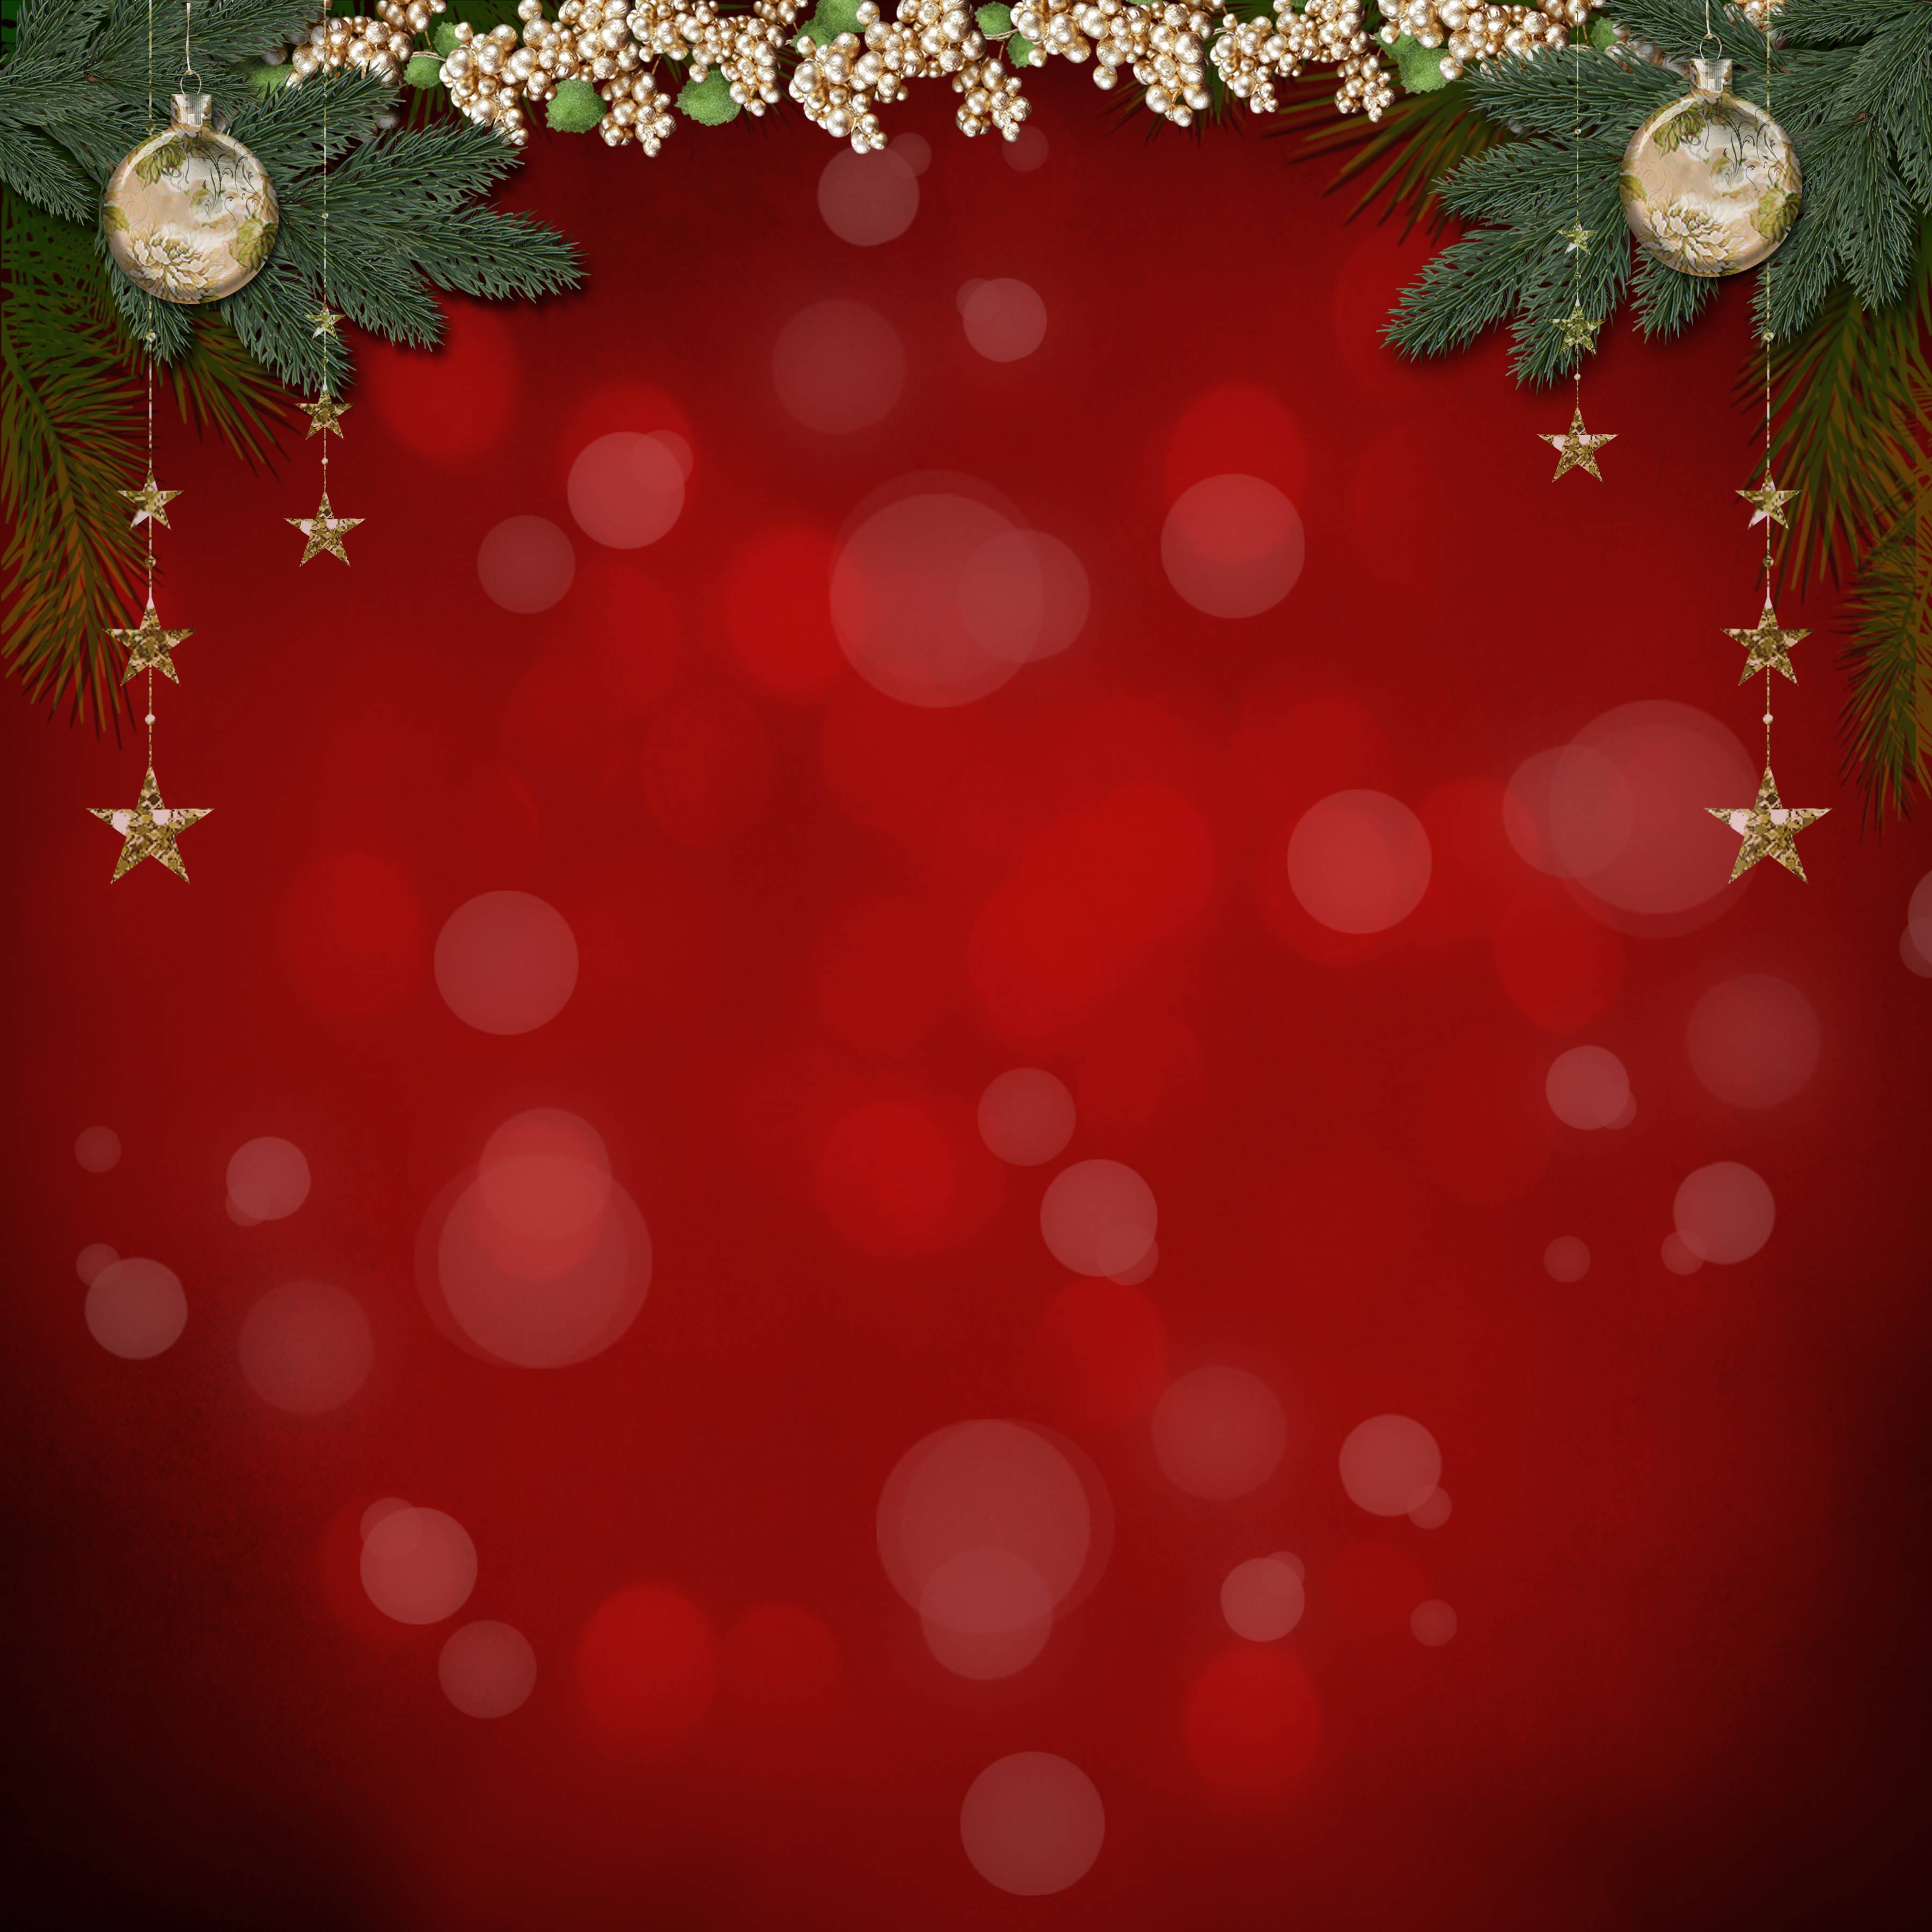 Simple Red And Green Christmas Wallpaper